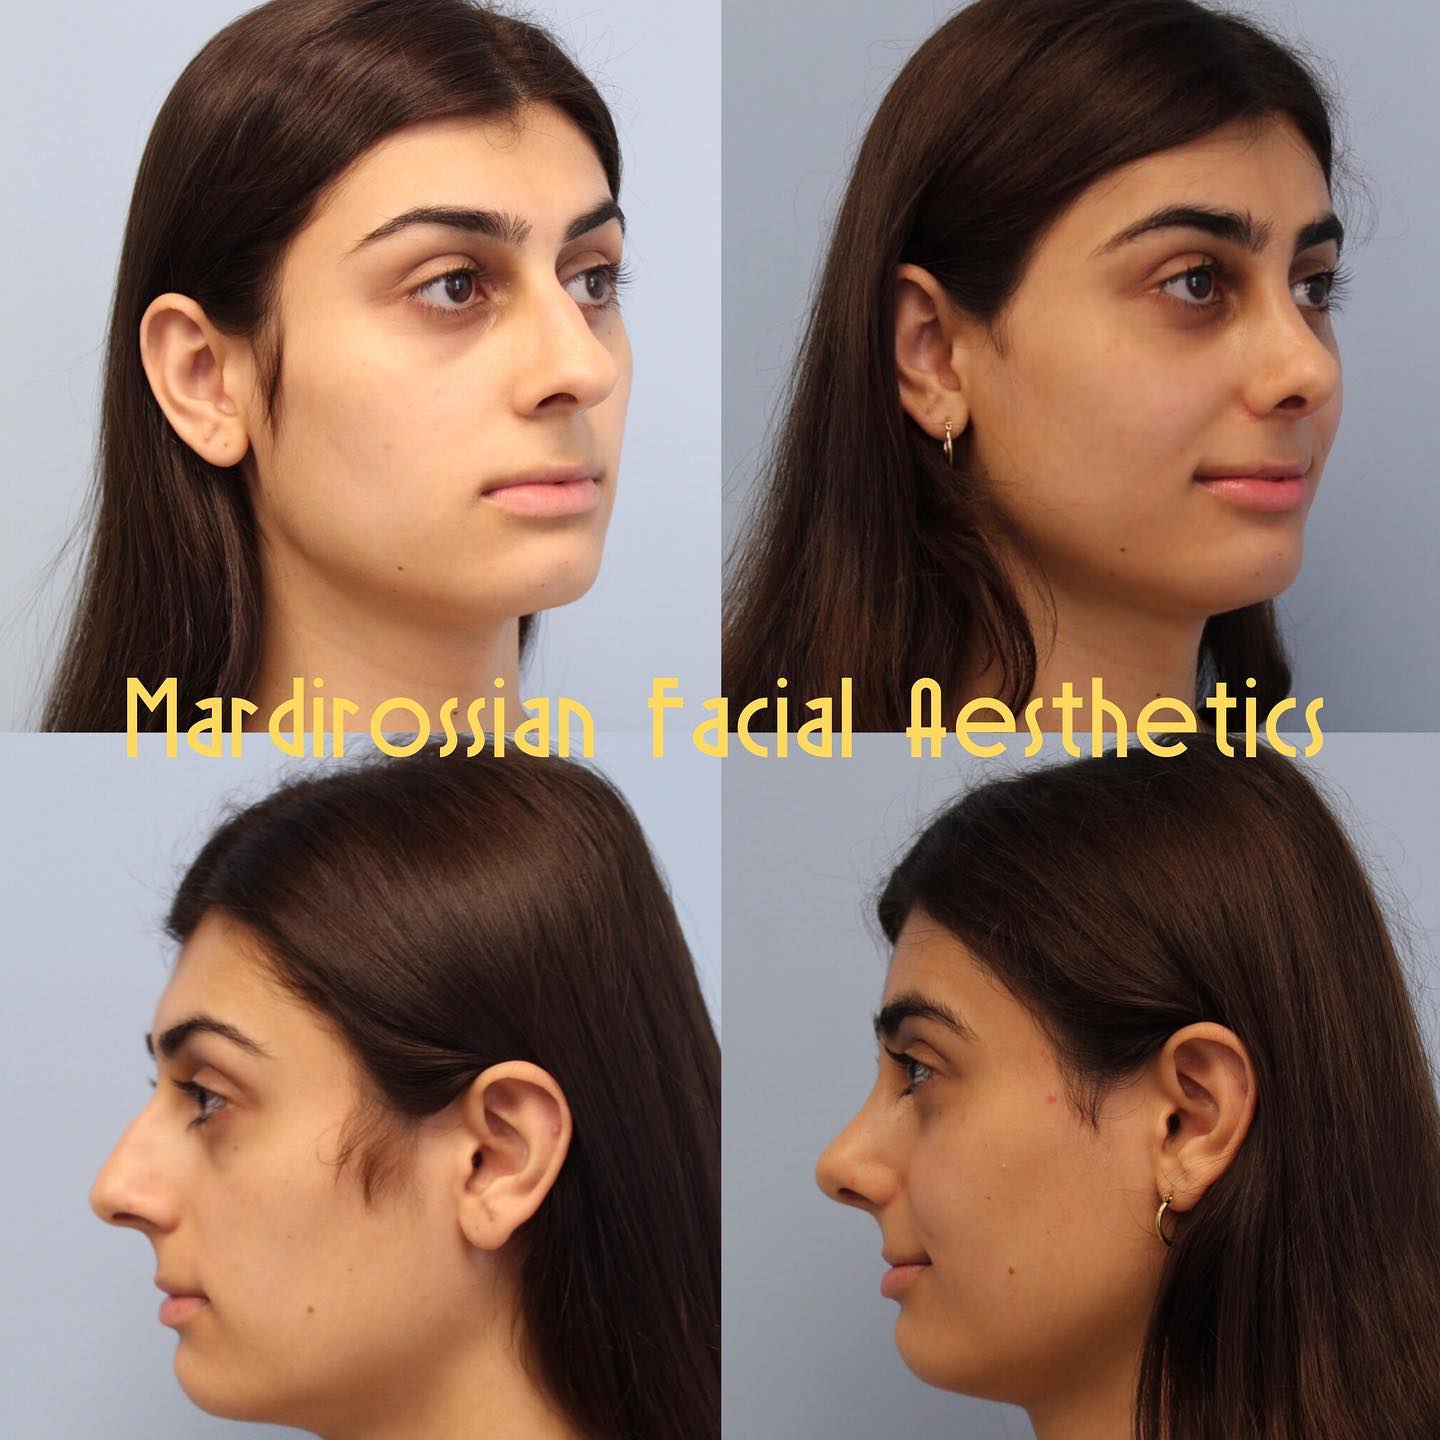 Fat Transfer and Injections Before and After Pictures in McLean, VA